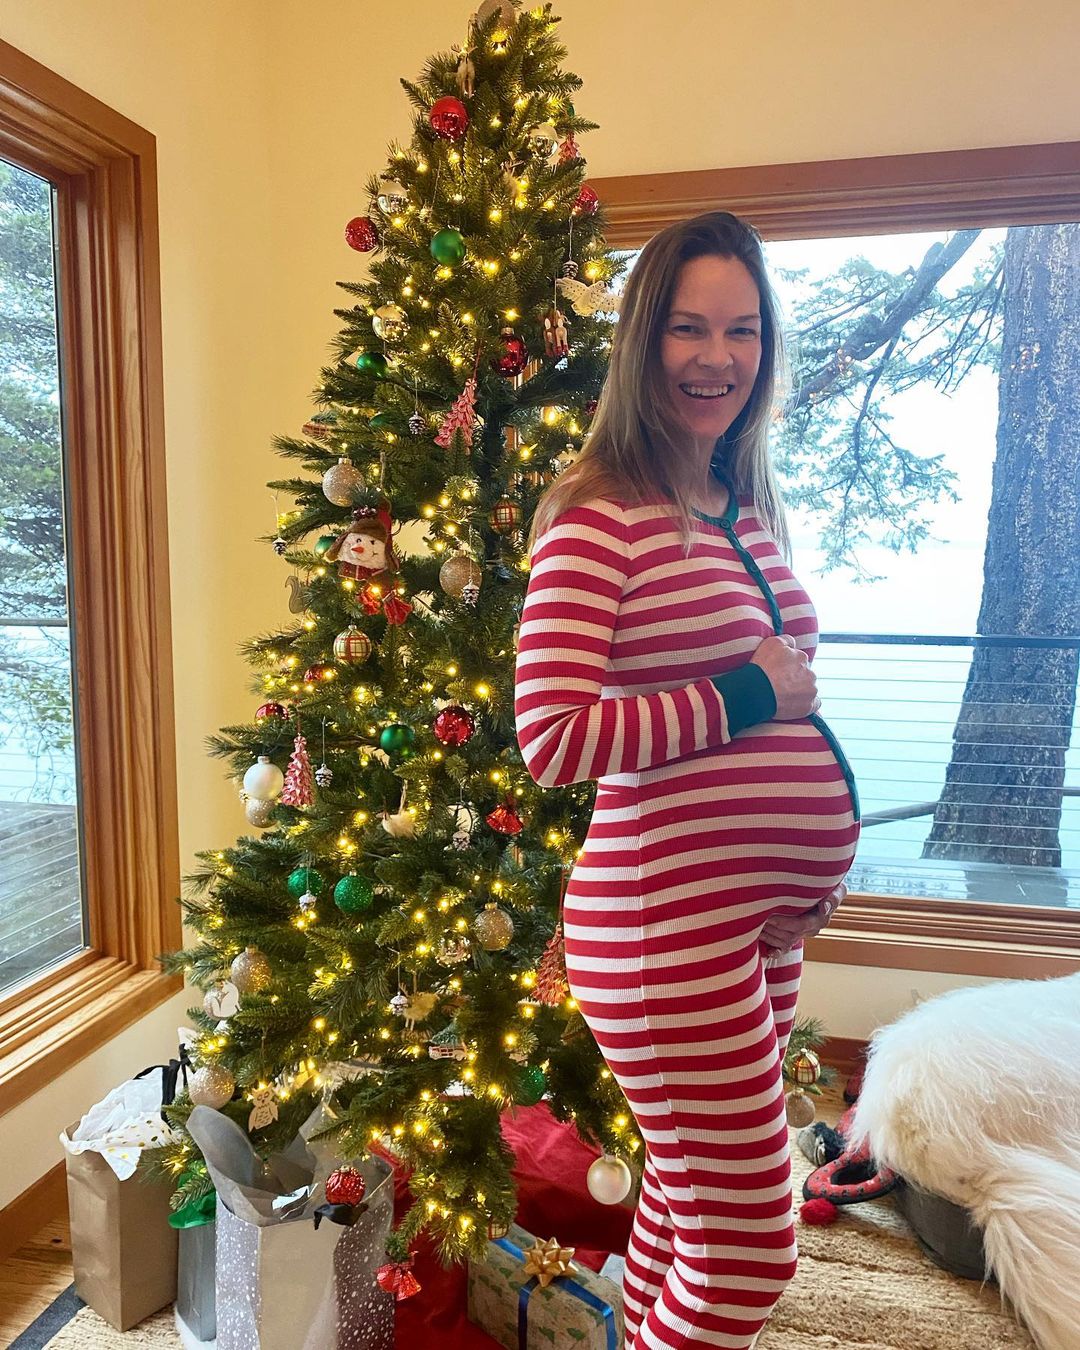 Pregnant Hilary Swank Is 'Ready' for Parenthood With Philip